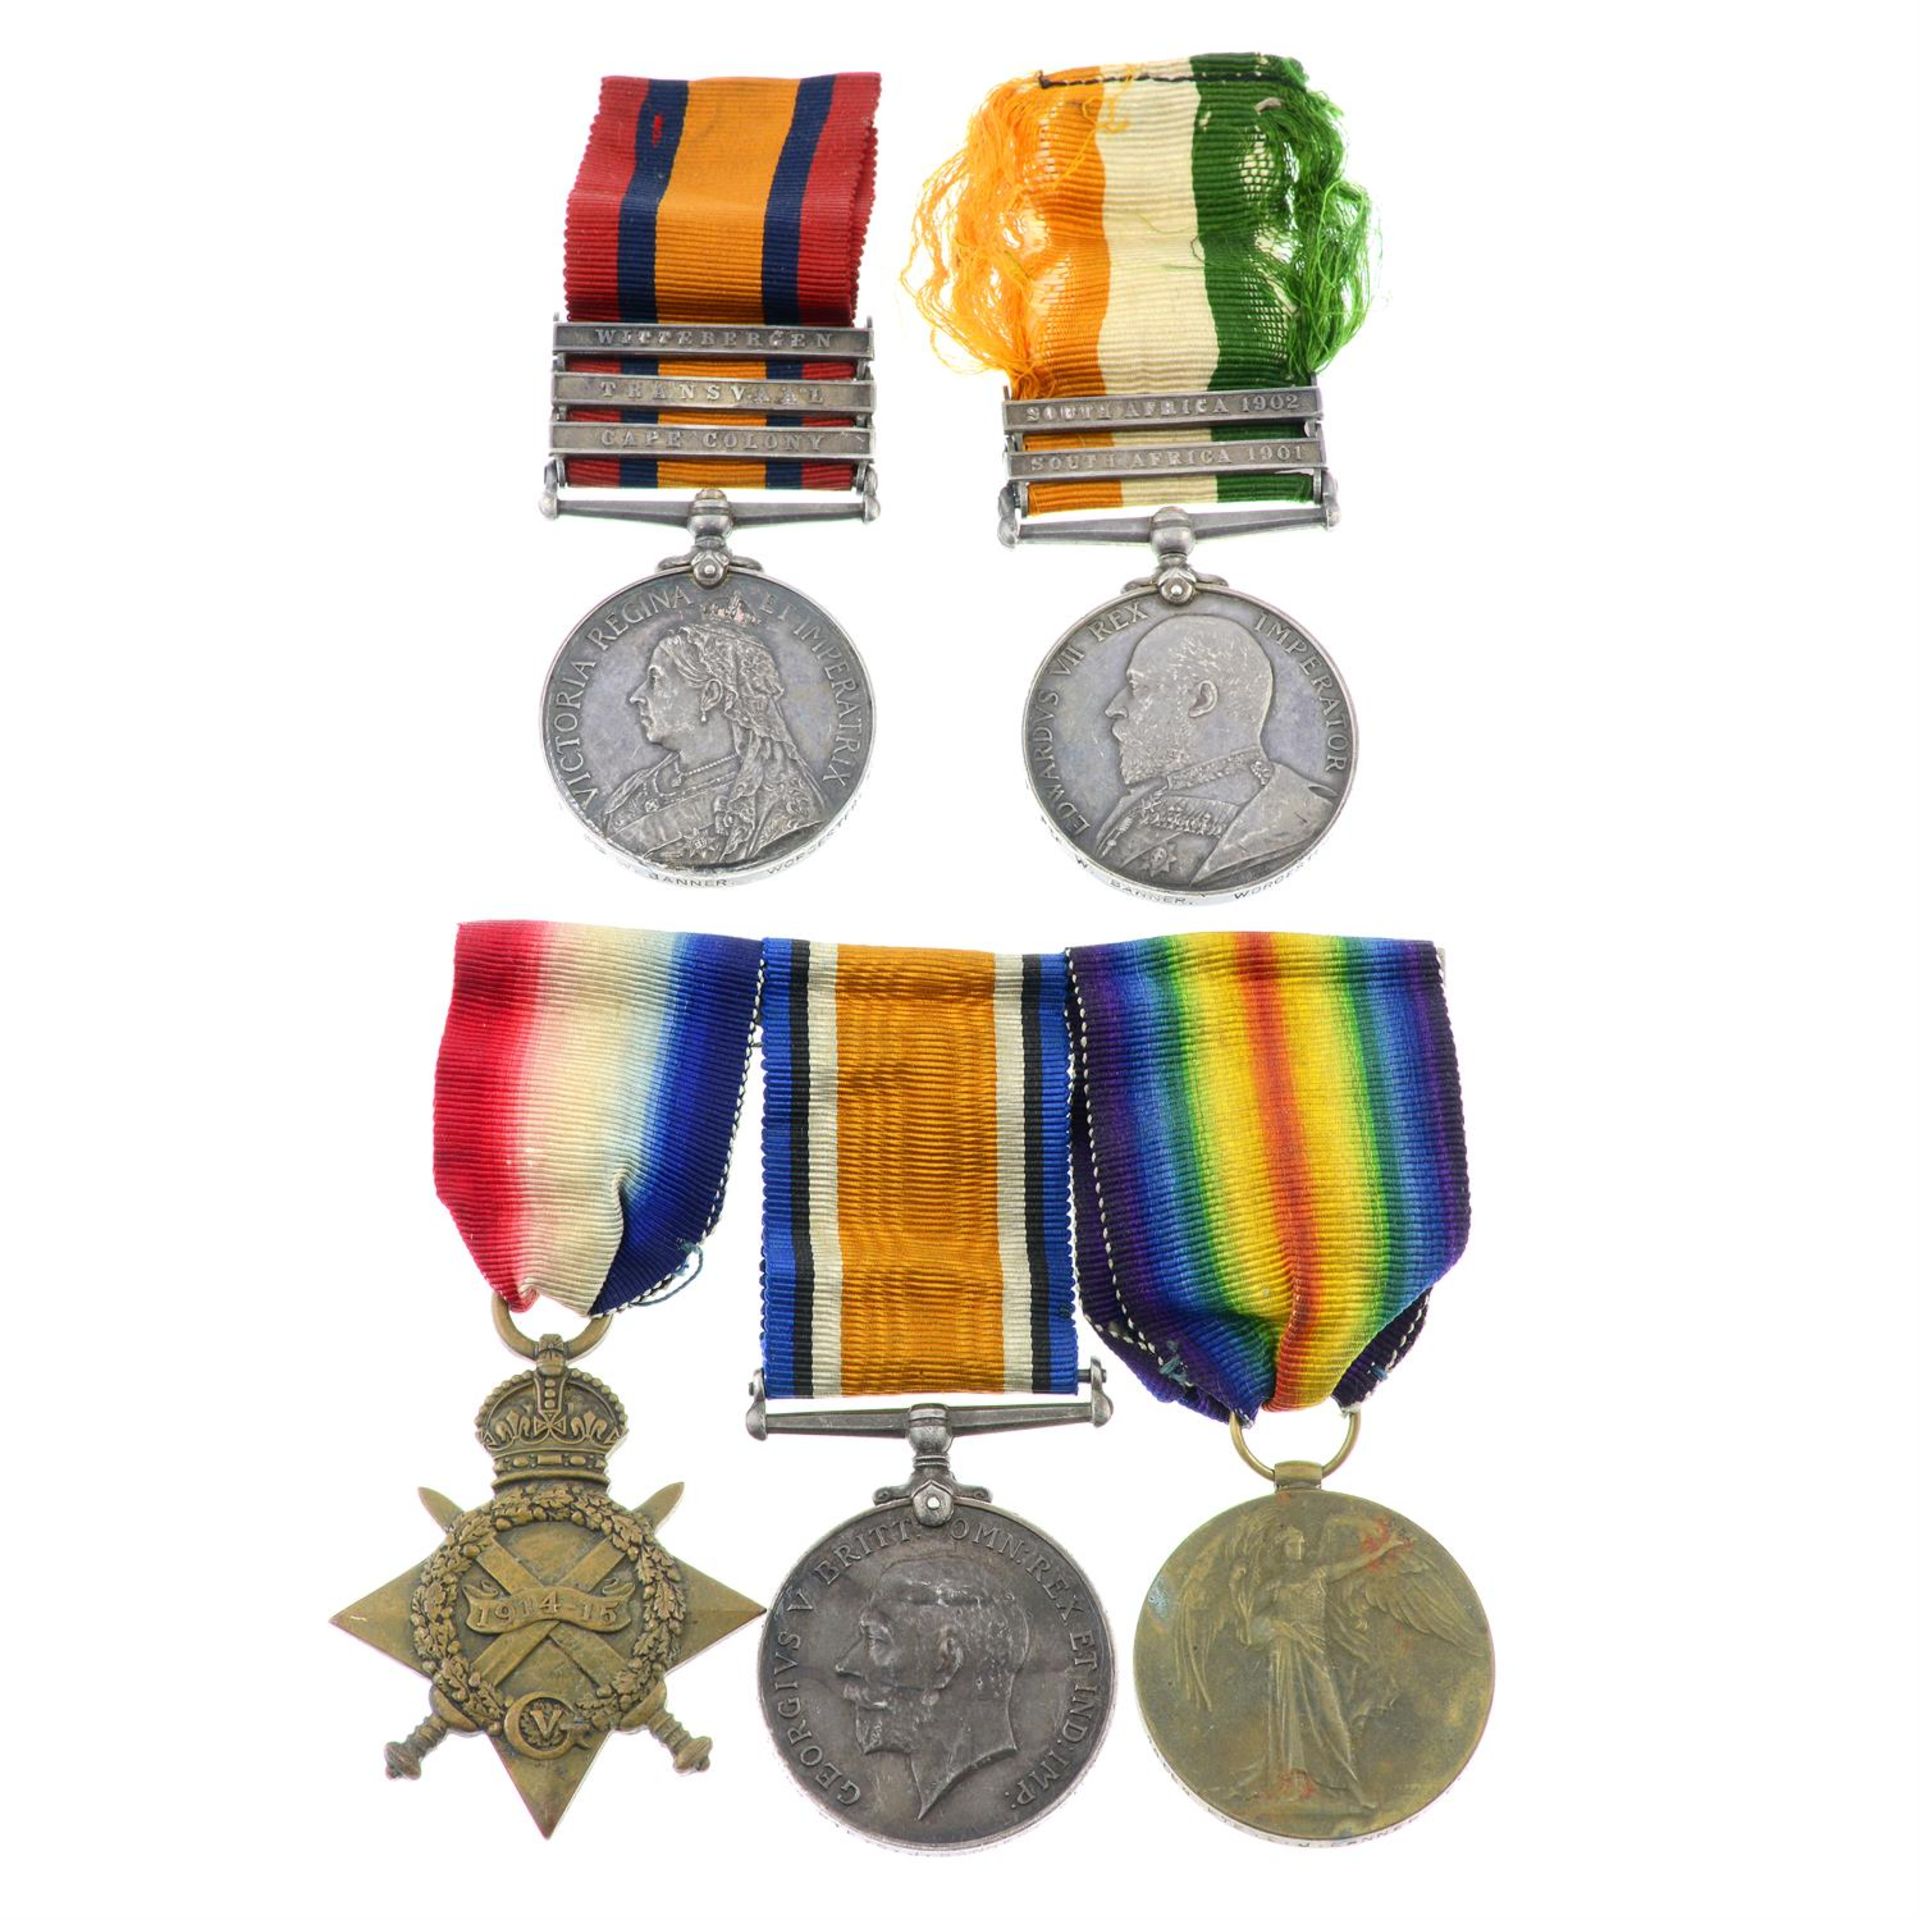 A Queens South Africa Medal & Kings South Africa Medal, together with a Great War Trio.